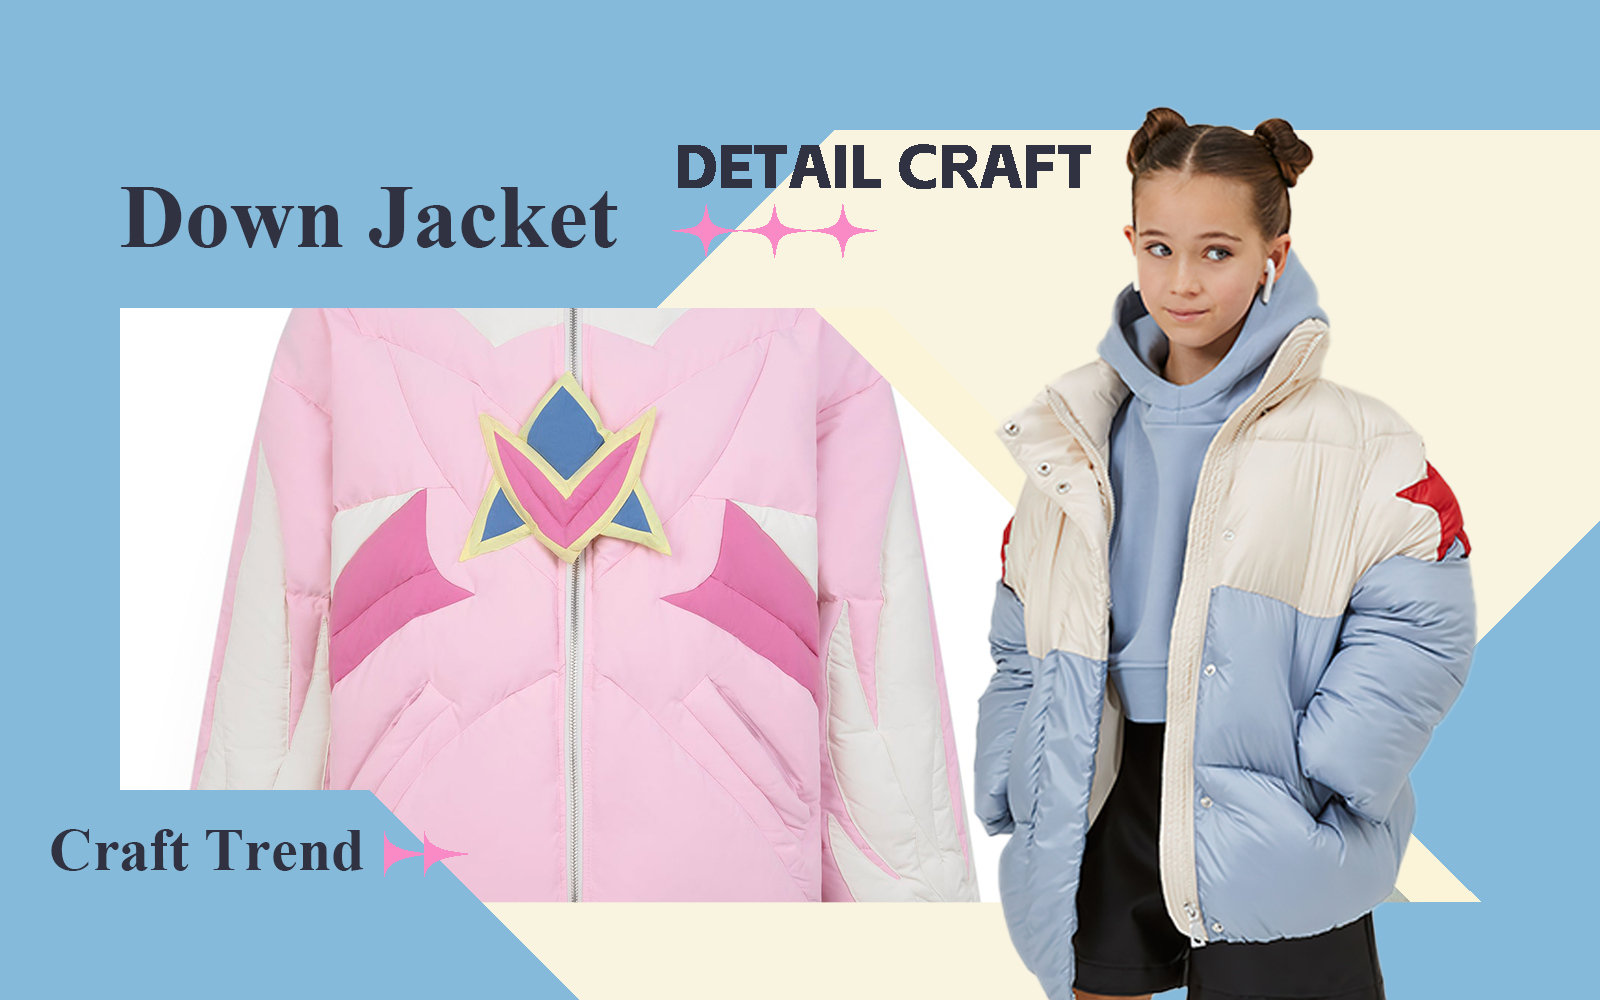 Down Jacket -- The Detail & Craft Trend for Girlswear